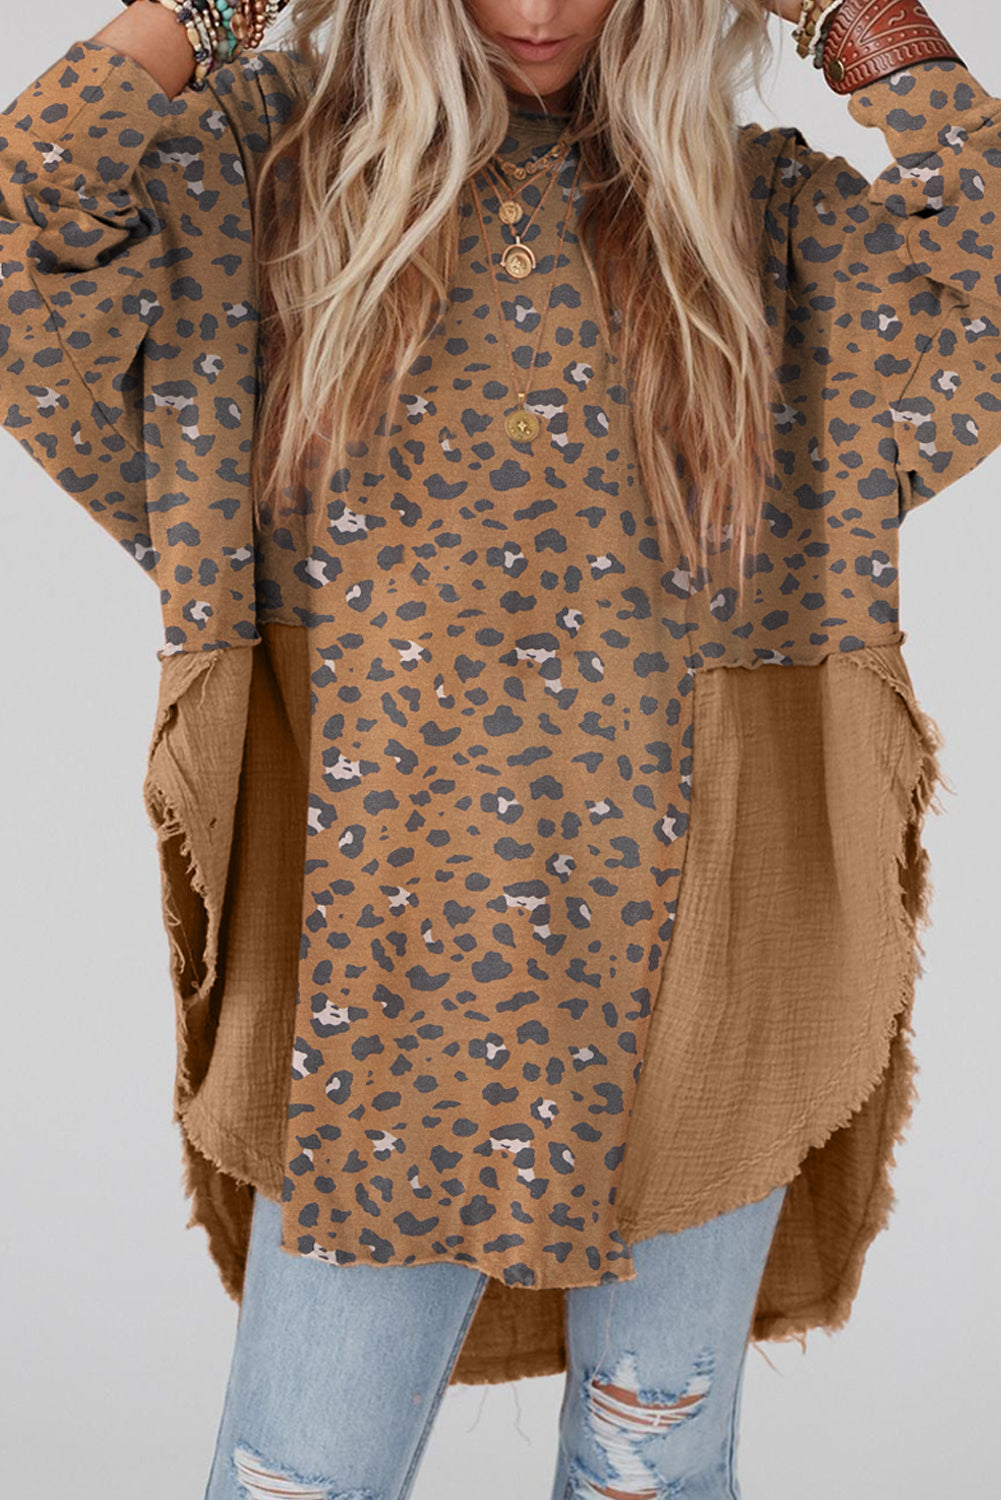 Textured Leopard Dropped Shoulder Blouse - Mocha / S - Women’s Clothing & Accessories - Shirts & Tops - 4 - 2024